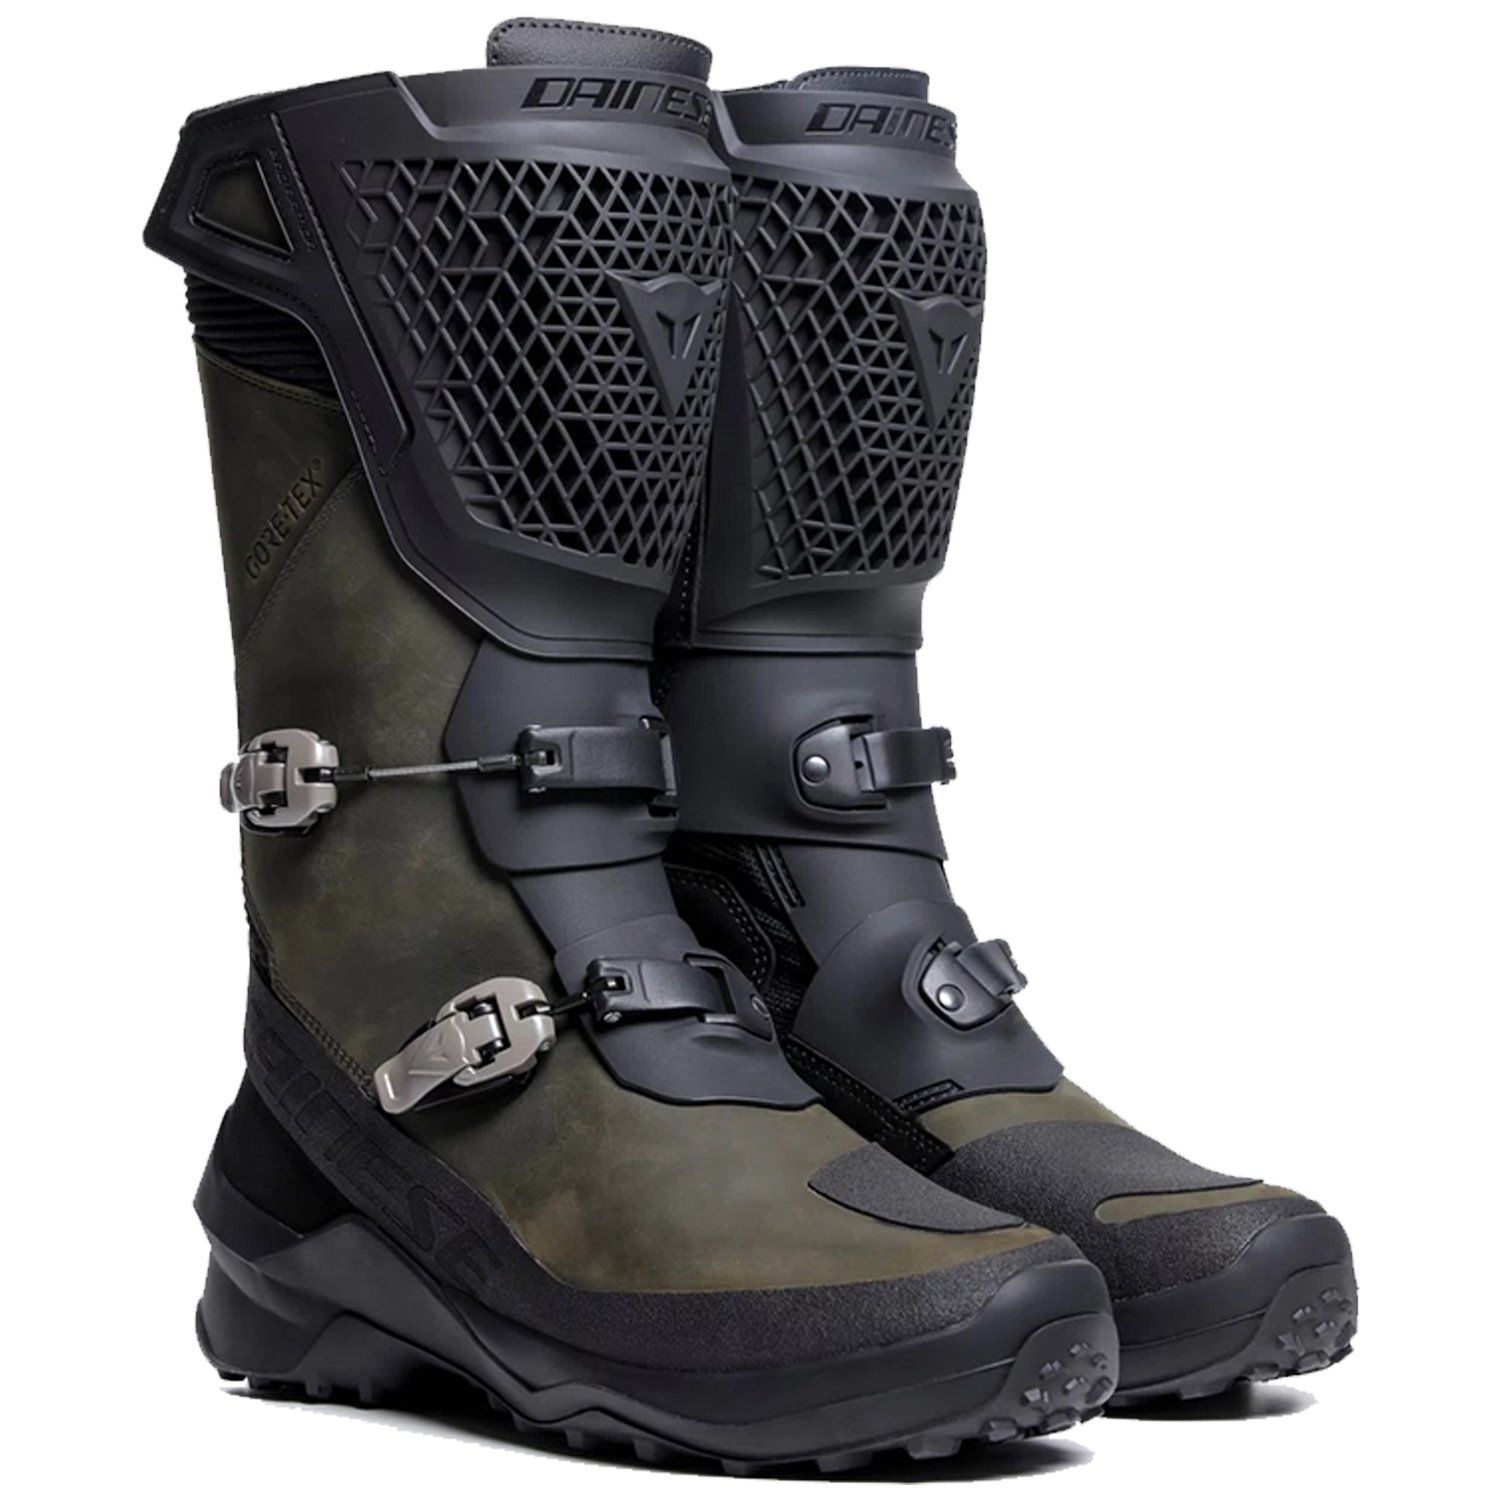 Image of Dainese Seeker Gore-Tex Boots Black Army Green Size 43 ID 8051019544513